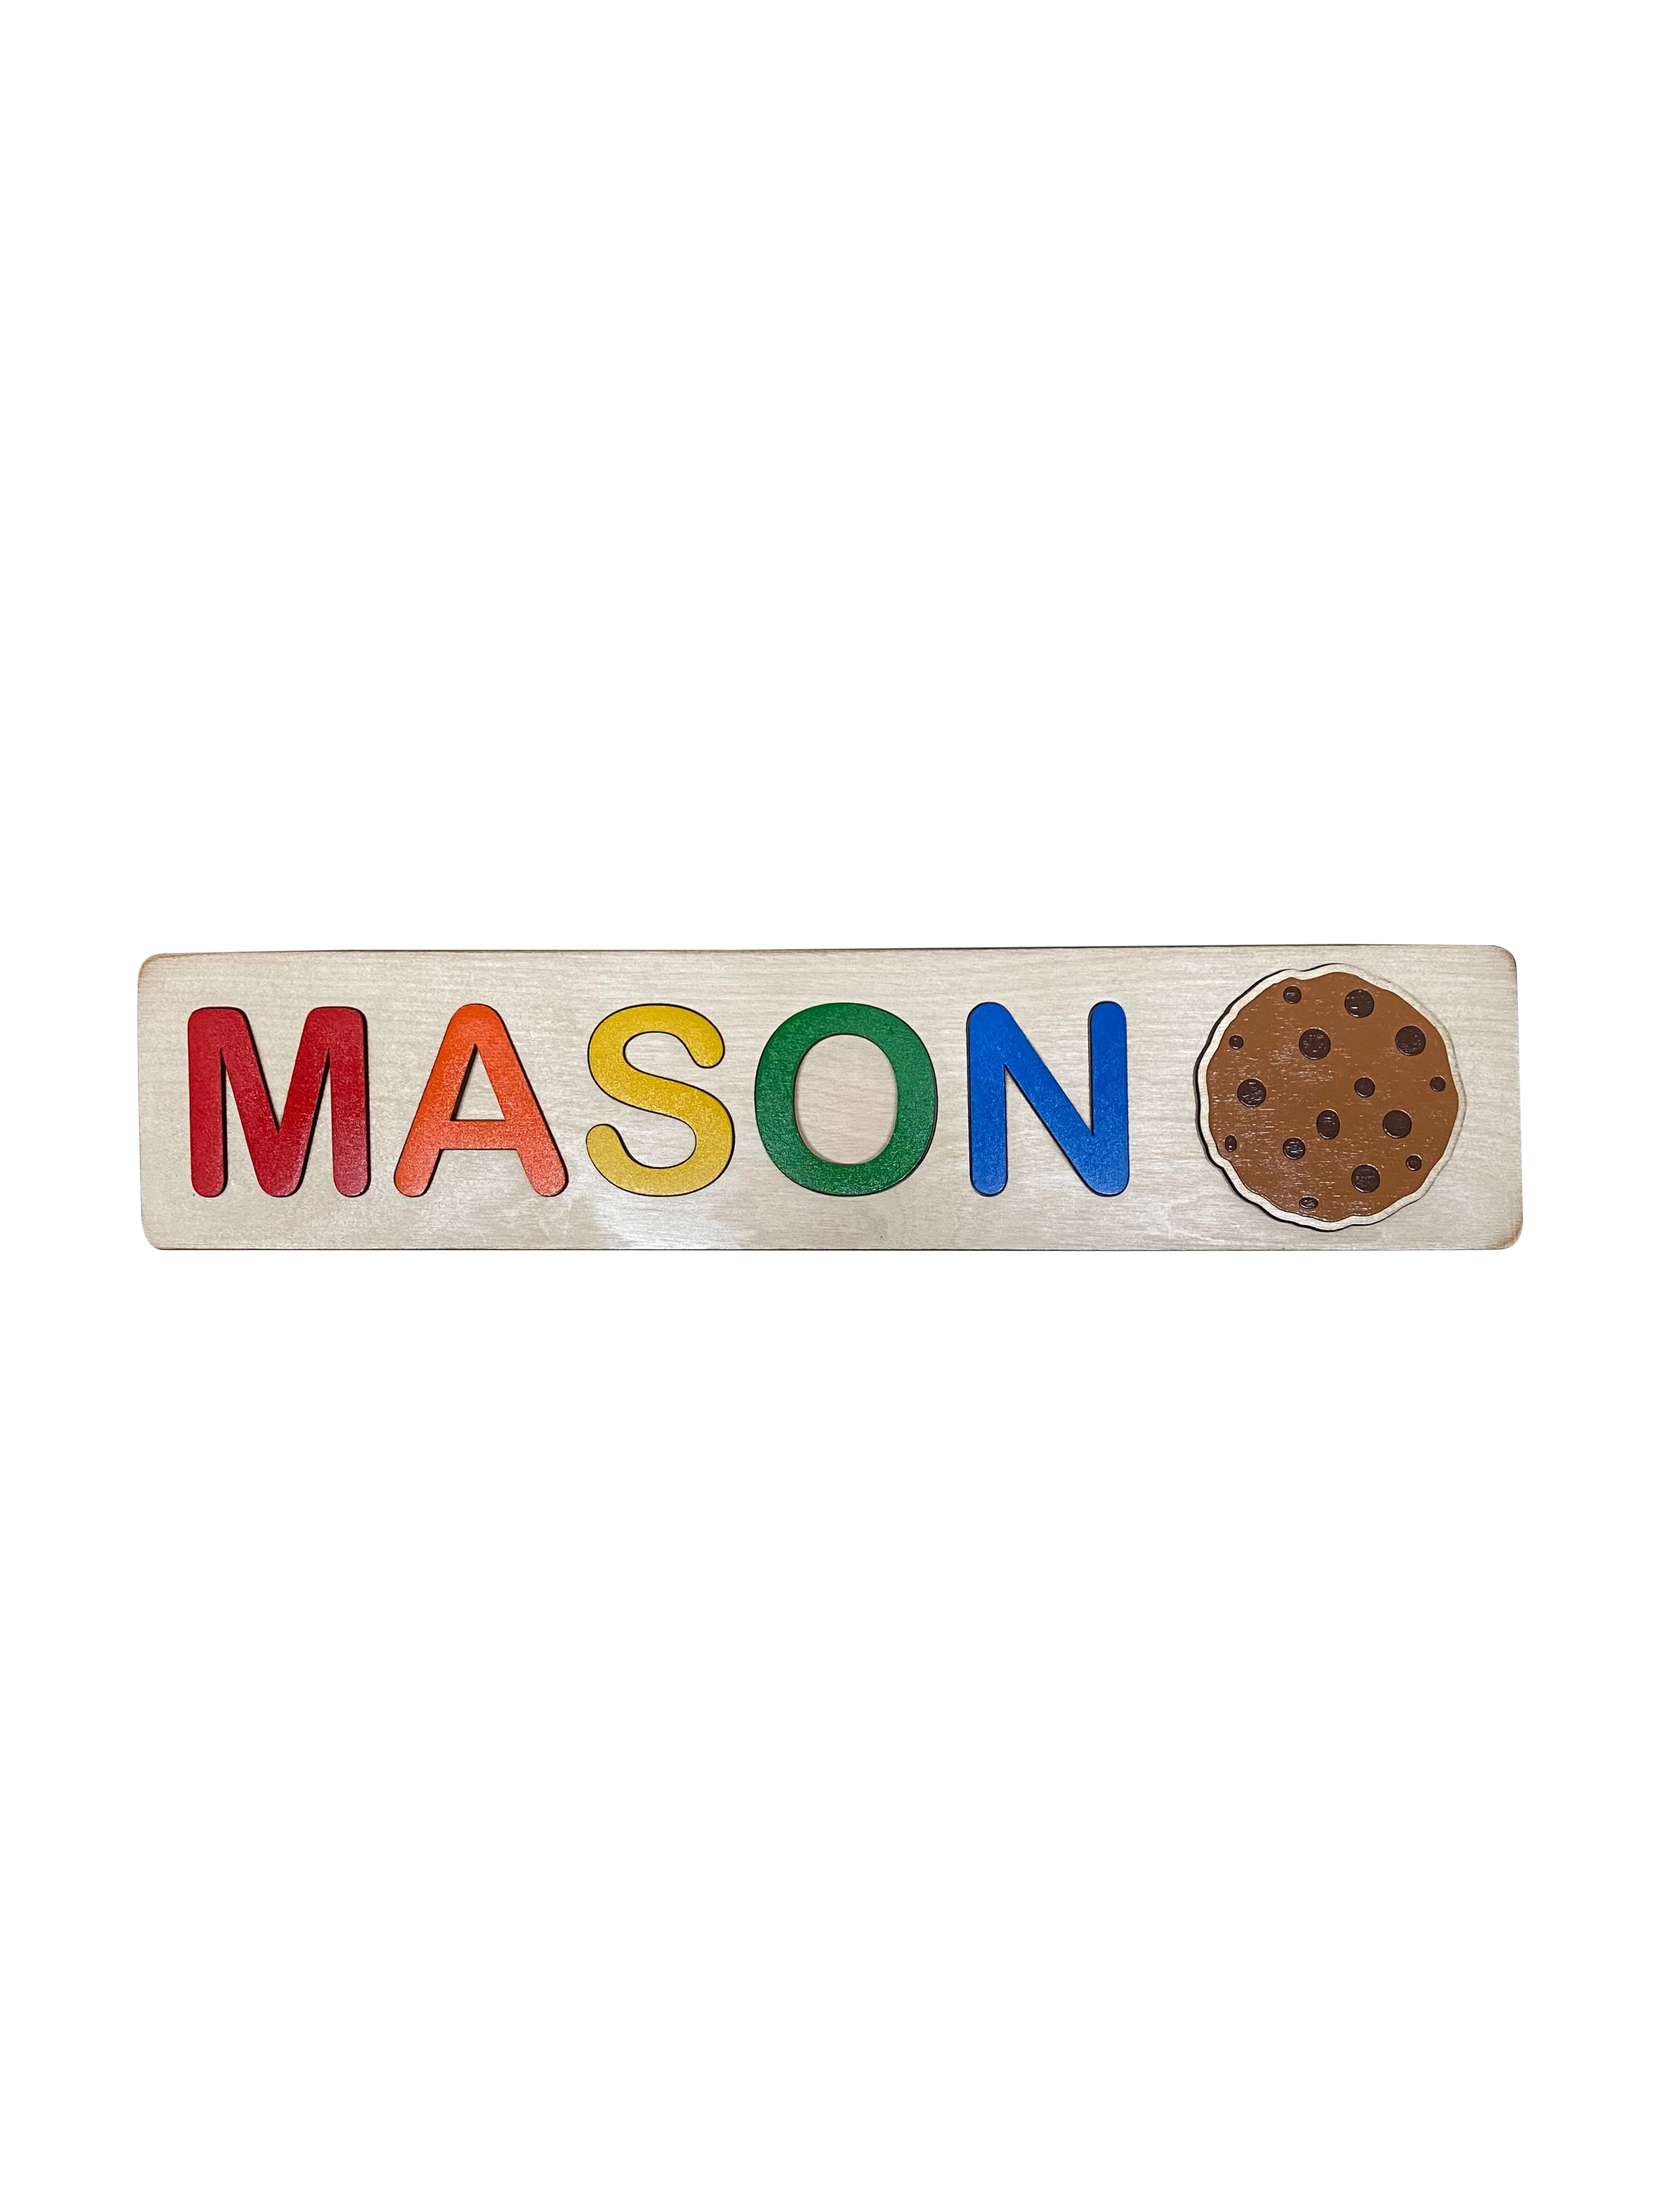 3D Hand Painted Wooden Name Puzzle - BirdsWoodShack